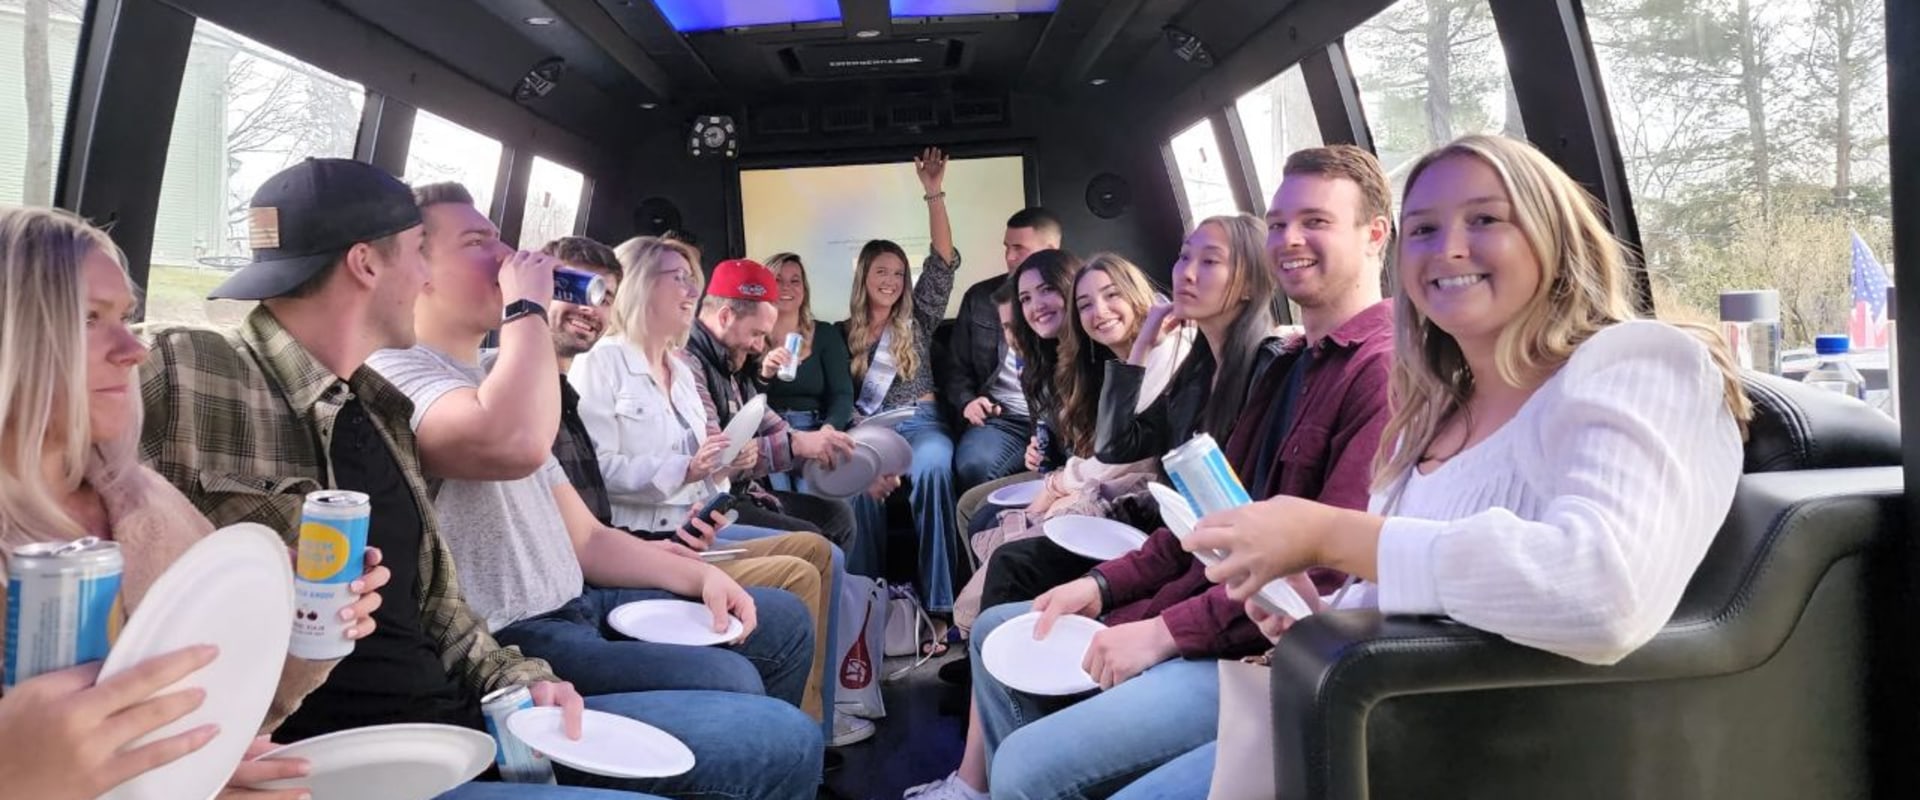 Can you drink on a party bus in ohio?